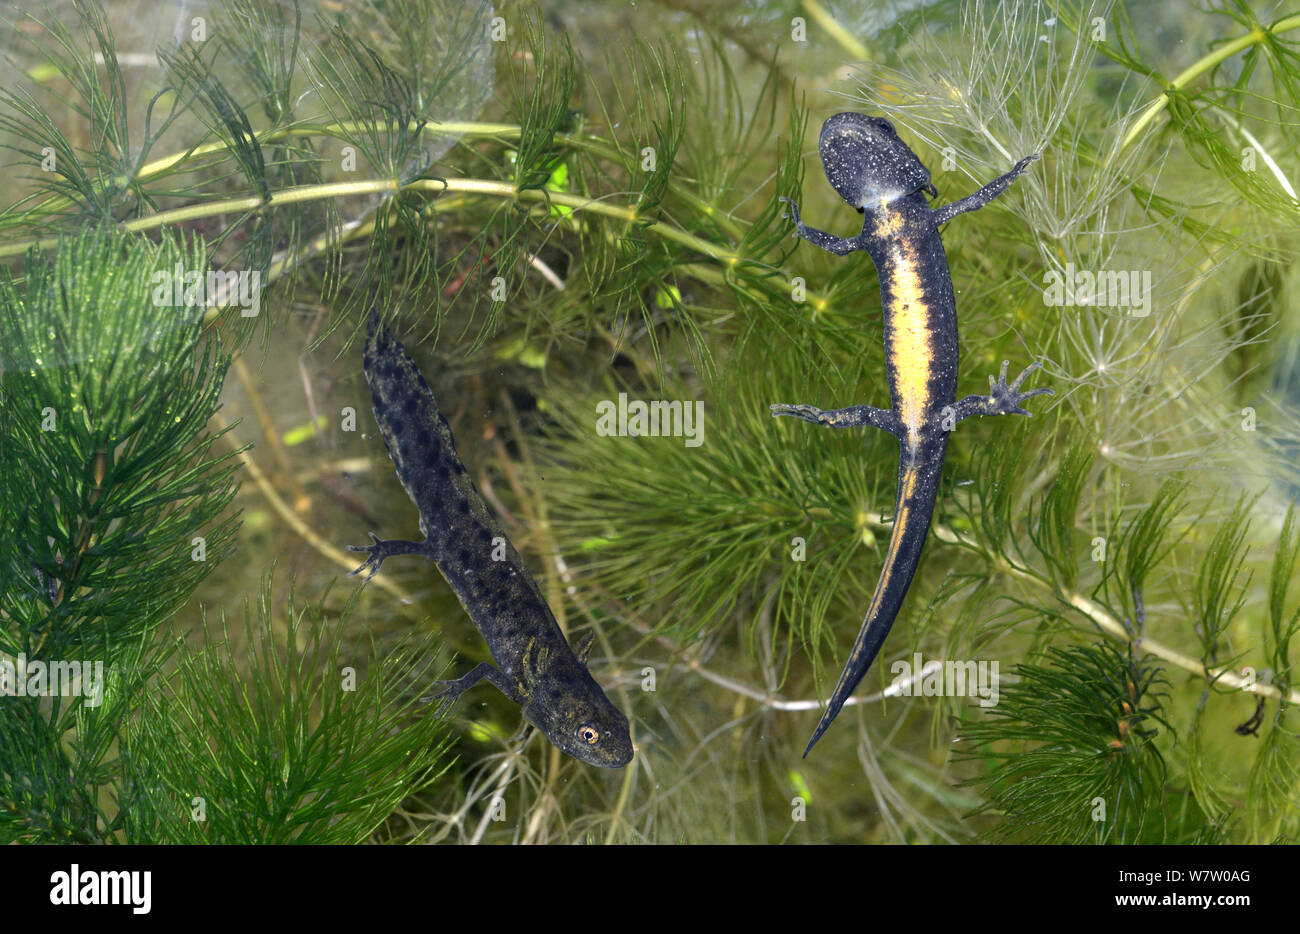 Two Great Crested Newt (Triturus cristatus) tadpoles at final stage of development, Herefordshire, England, UK, captive, September. Stock Photo